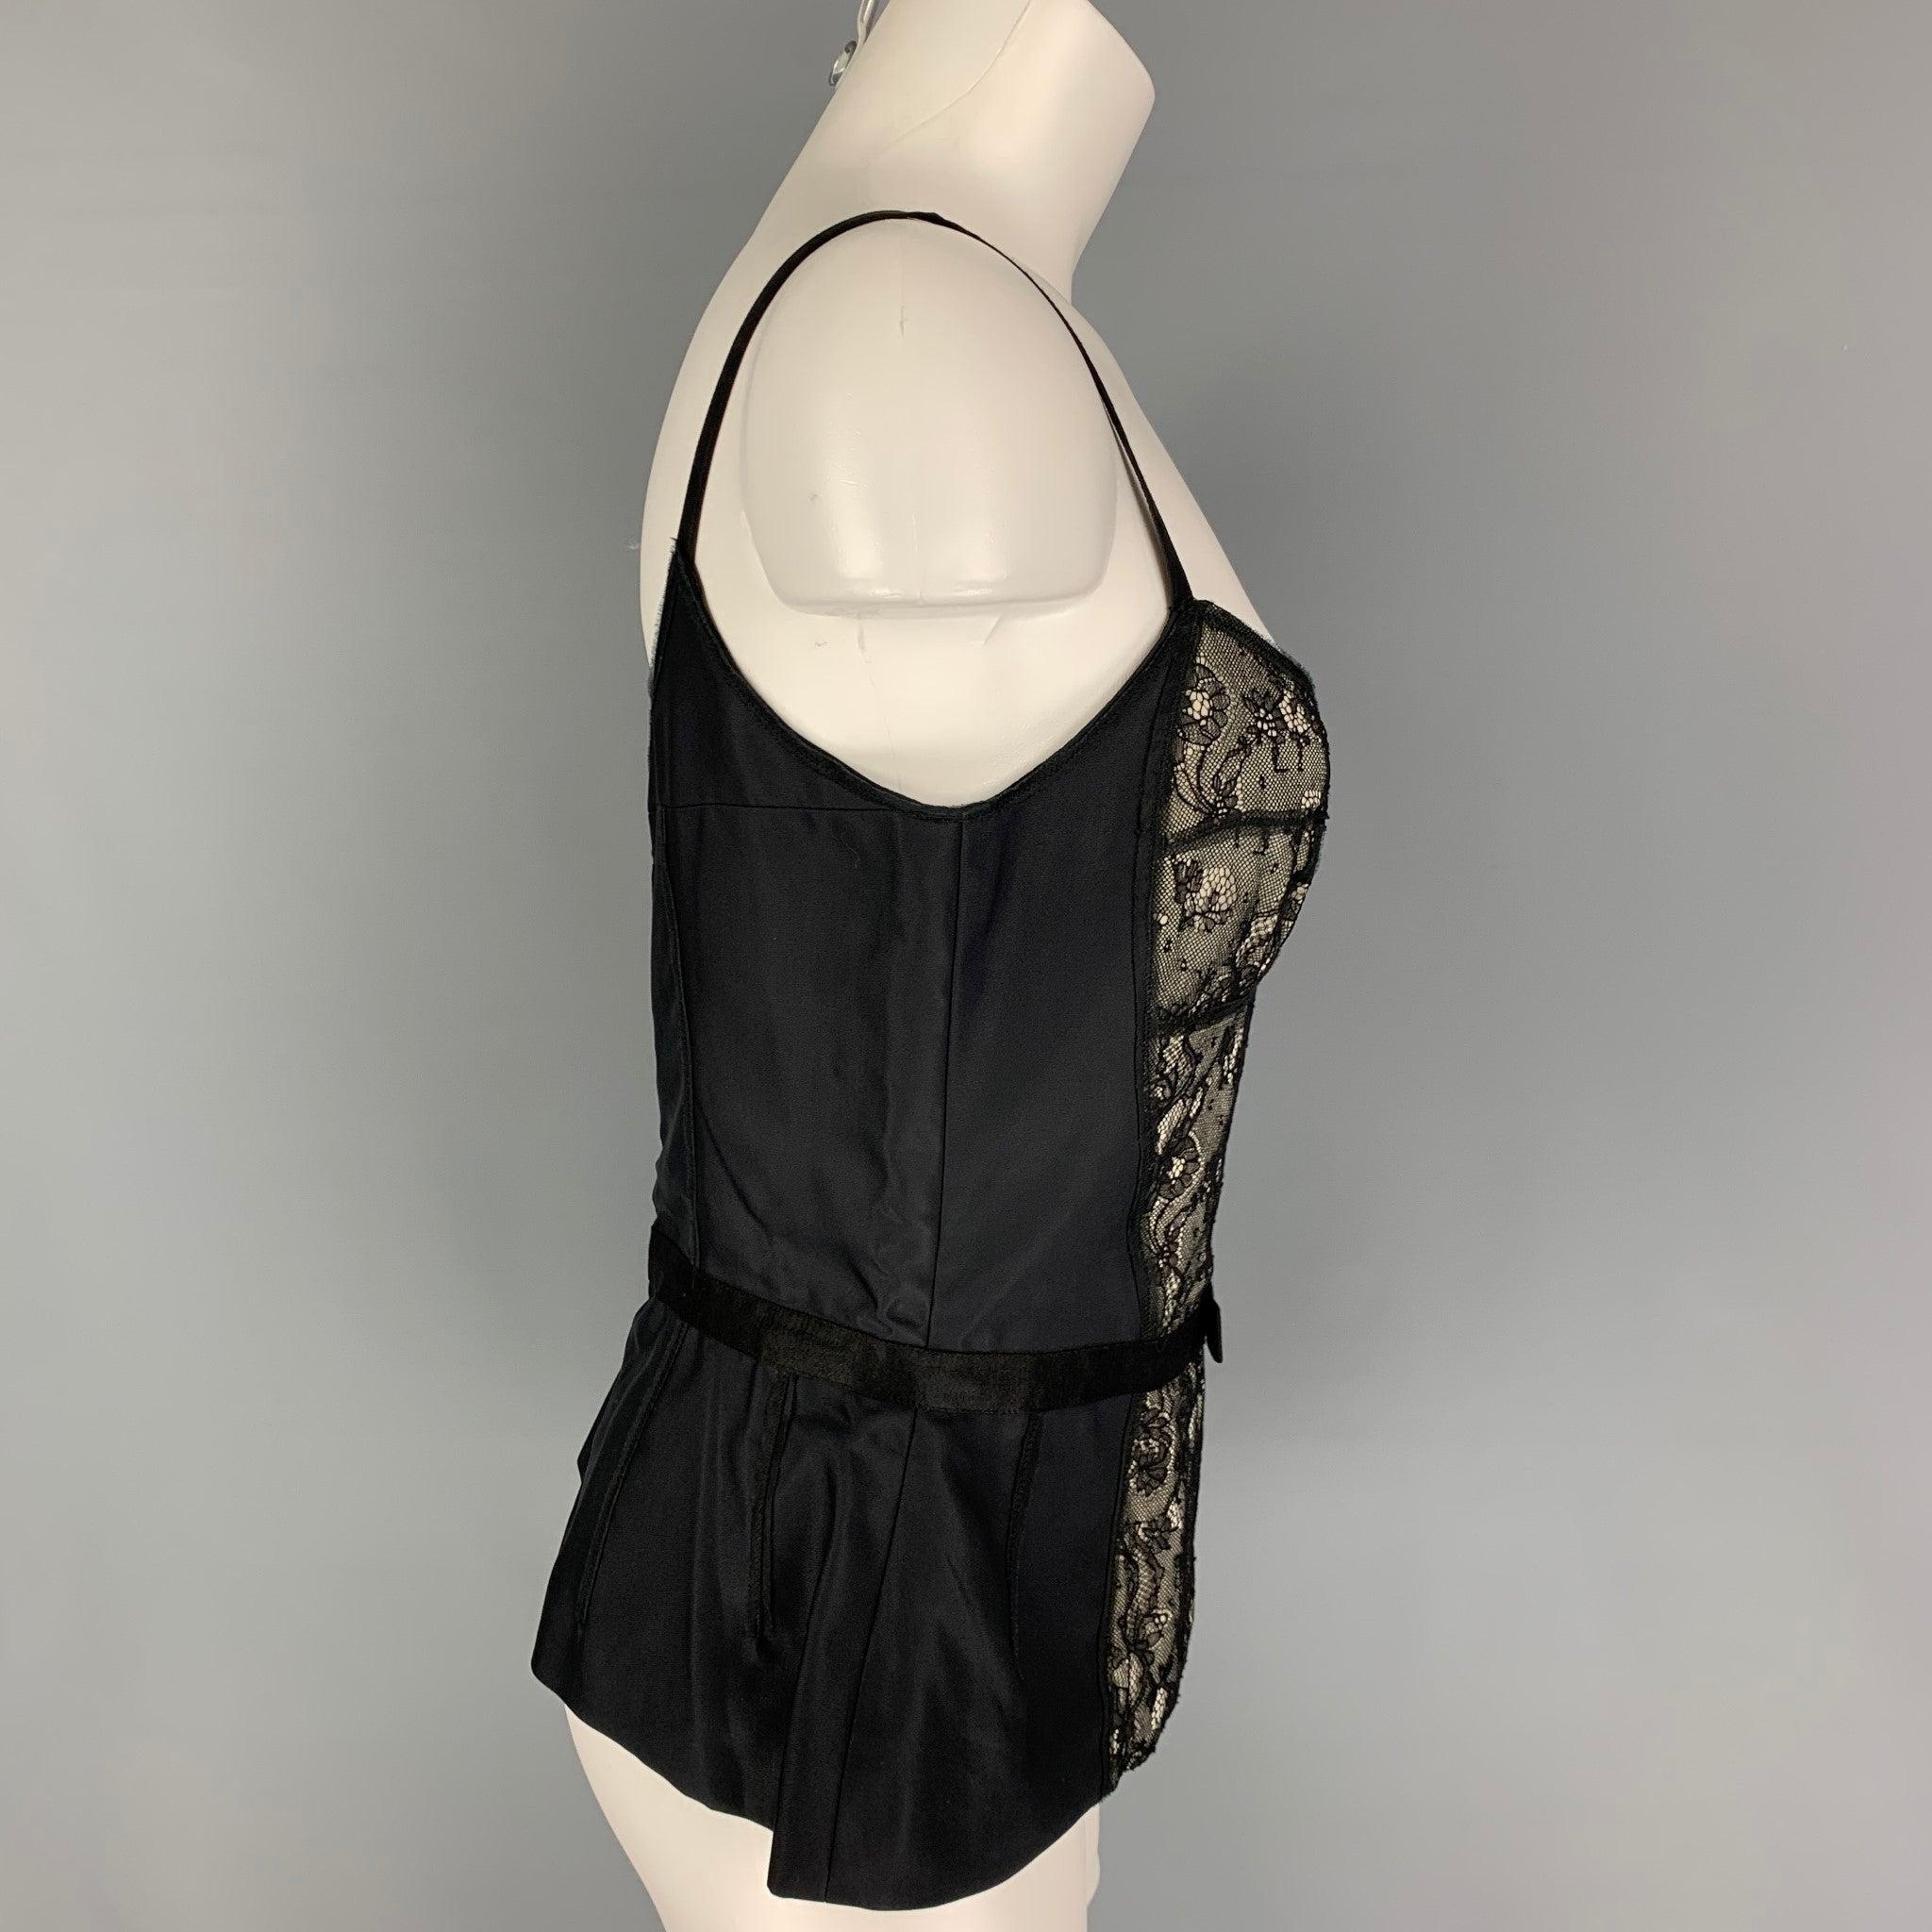 D&G by DOLCE & GABBANA dress top comes in a black lace rayon featuring a bustier style, bow detail, and 
back zip up closure.
Very Good
Pre-Owned Condition. 

Marked:   44 

Measurements: 
  Bust: 30 inches  Length: 13.5 inches 

  
  
 
Reference: